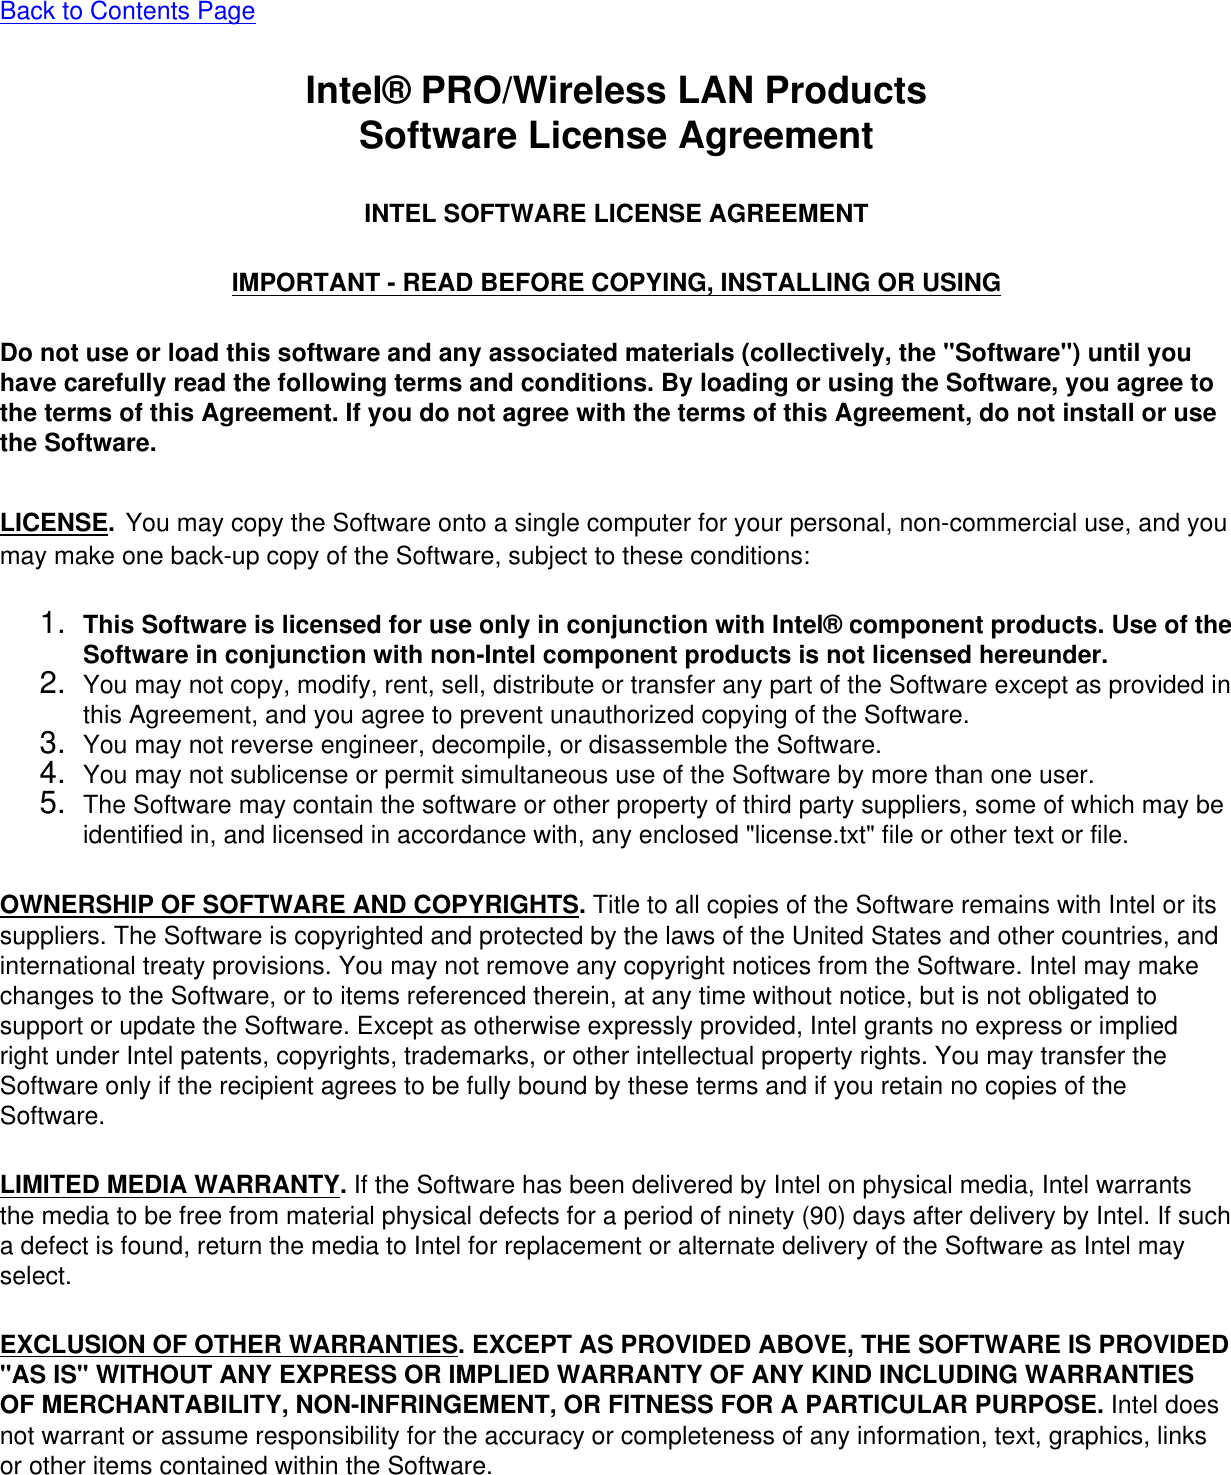 Back to Contents PageIntel® PRO/Wireless LAN ProductsSoftware License AgreementINTEL SOFTWARE LICENSE AGREEMENTIMPORTANT - READ BEFORE COPYING, INSTALLING OR USINGDo not use or load this software and any associated materials (collectively, the &quot;Software&quot;) until you have carefully read the following terms and conditions. By loading or using the Software, you agree to the terms of this Agreement. If you do not agree with the terms of this Agreement, do not install or use the Software.LICENSE. You may copy the Software onto a single computer for your personal, non-commercial use, and you may make one back-up copy of the Software, subject to these conditions:1.  This Software is licensed for use only in conjunction with Intel® component products. Use of the Software in conjunction with non-Intel component products is not licensed hereunder.2.  You may not copy, modify, rent, sell, distribute or transfer any part of the Software except as provided in this Agreement, and you agree to prevent unauthorized copying of the Software.3.  You may not reverse engineer, decompile, or disassemble the Software.4.  You may not sublicense or permit simultaneous use of the Software by more than one user.5.  The Software may contain the software or other property of third party suppliers, some of which may be identified in, and licensed in accordance with, any enclosed &quot;license.txt&quot; file or other text or file.OWNERSHIP OF SOFTWARE AND COPYRIGHTS. Title to all copies of the Software remains with Intel or its suppliers. The Software is copyrighted and protected by the laws of the United States and other countries, and international treaty provisions. You may not remove any copyright notices from the Software. Intel may make changes to the Software, or to items referenced therein, at any time without notice, but is not obligated to support or update the Software. Except as otherwise expressly provided, Intel grants no express or implied right under Intel patents, copyrights, trademarks, or other intellectual property rights. You may transfer the Software only if the recipient agrees to be fully bound by these terms and if you retain no copies of the Software.LIMITED MEDIA WARRANTY. If the Software has been delivered by Intel on physical media, Intel warrants the media to be free from material physical defects for a period of ninety (90) days after delivery by Intel. If such a defect is found, return the media to Intel for replacement or alternate delivery of the Software as Intel may select.EXCLUSION OF OTHER WARRANTIES. EXCEPT AS PROVIDED ABOVE, THE SOFTWARE IS PROVIDED &quot;AS IS&quot; WITHOUT ANY EXPRESS OR IMPLIED WARRANTY OF ANY KIND INCLUDING WARRANTIES OF MERCHANTABILITY, NON-INFRINGEMENT, OR FITNESS FOR A PARTICULAR PURPOSE. Intel does not warrant or assume responsibility for the accuracy or completeness of any information, text, graphics, links or other items contained within the Software.